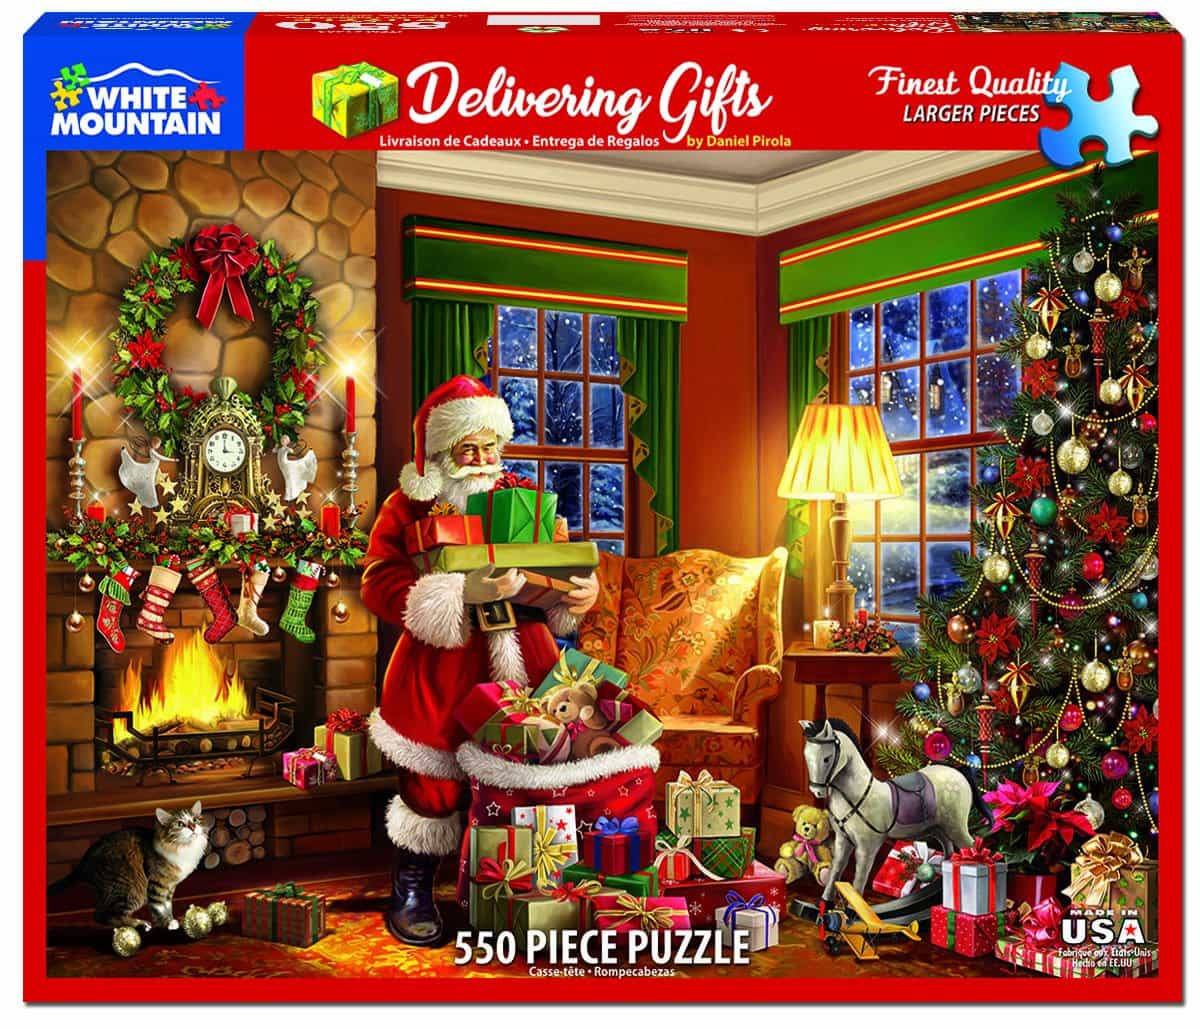 Delivering Gifts (550 pc puzzle)